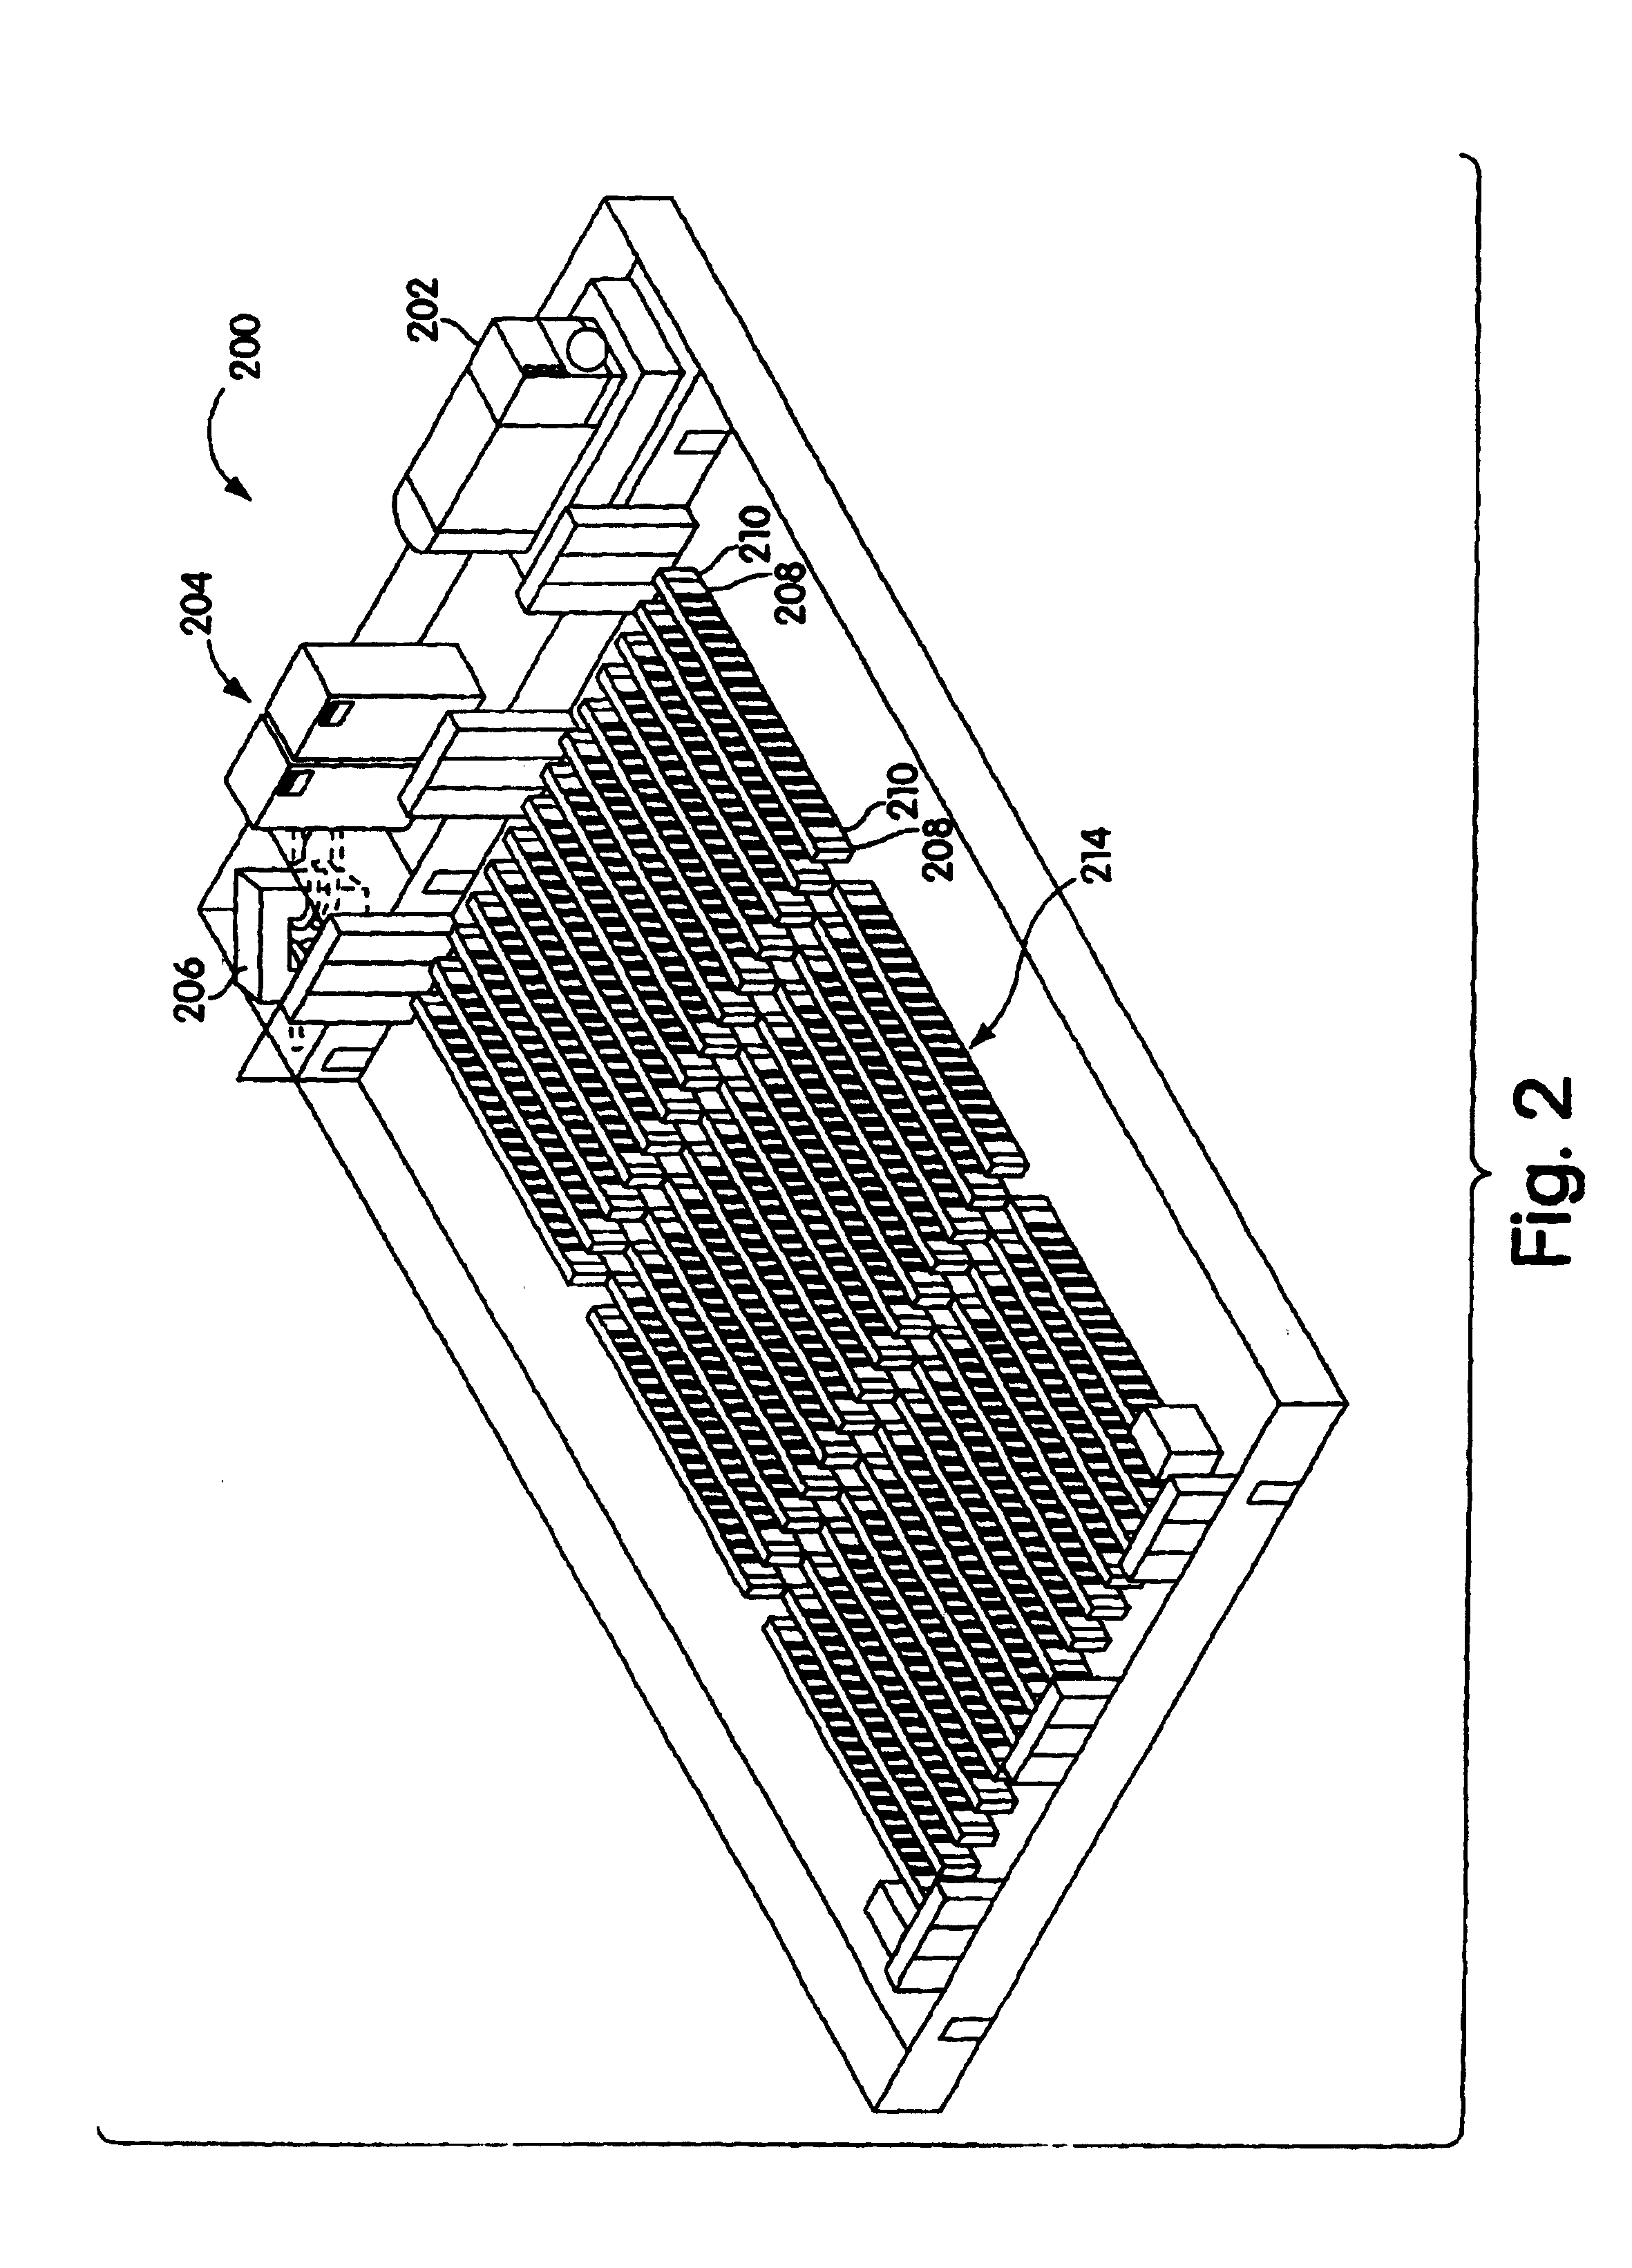 Adjustable scalable rack power system and method